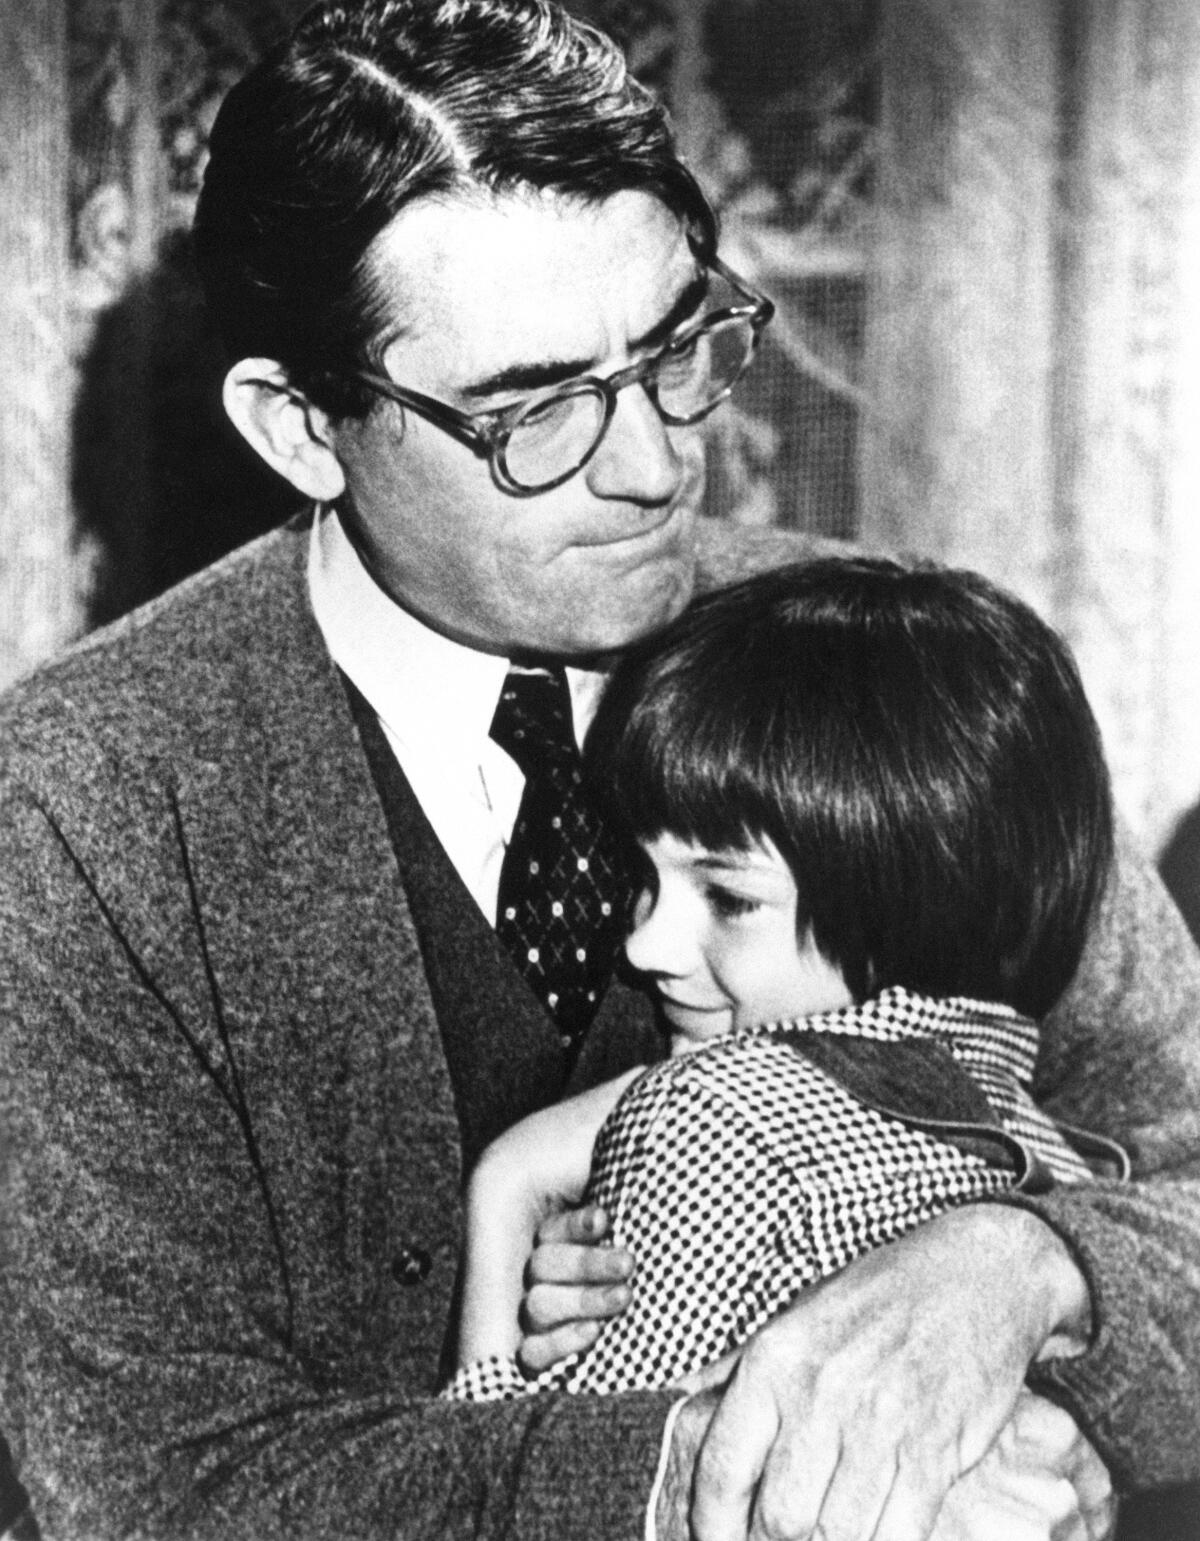 Gregory Peck embraces Mary Badham, 9, a Birmingham, Ala. acting discovery who plays his daughter in “To Kill a Mockingbird."